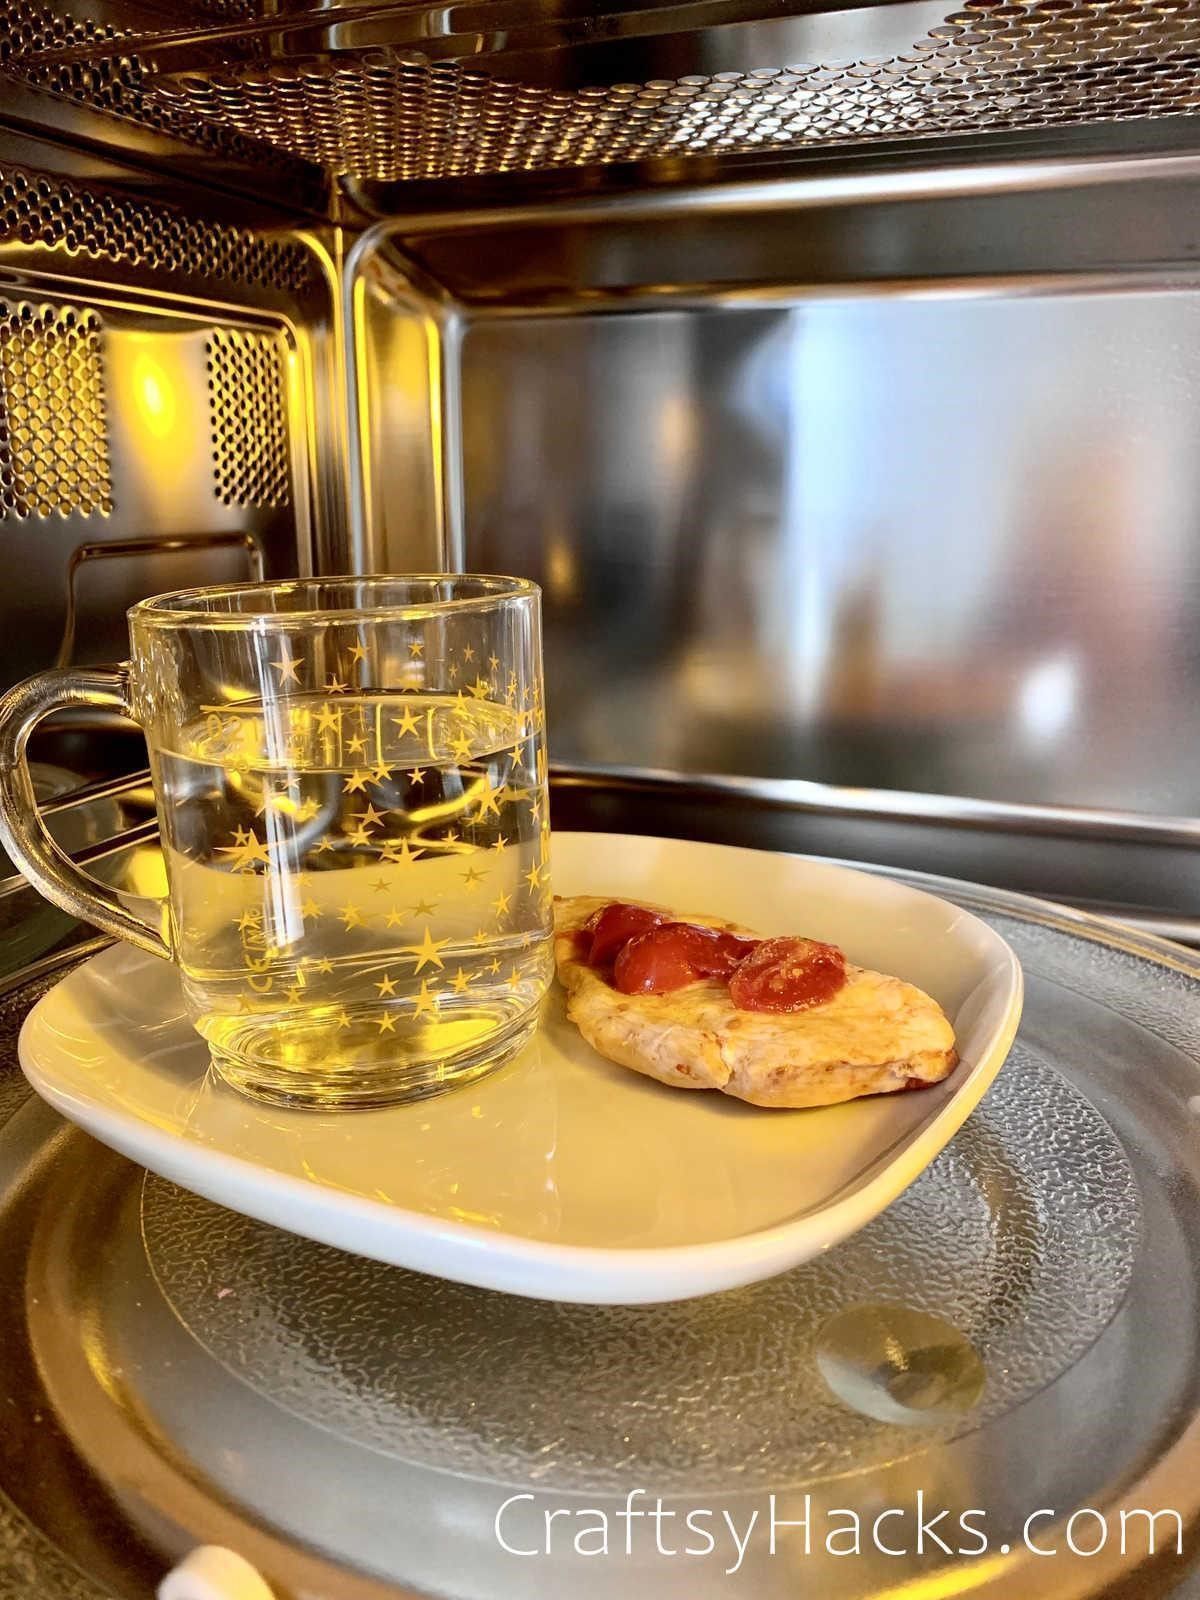 cup of water to prevent food from drying when microwaving